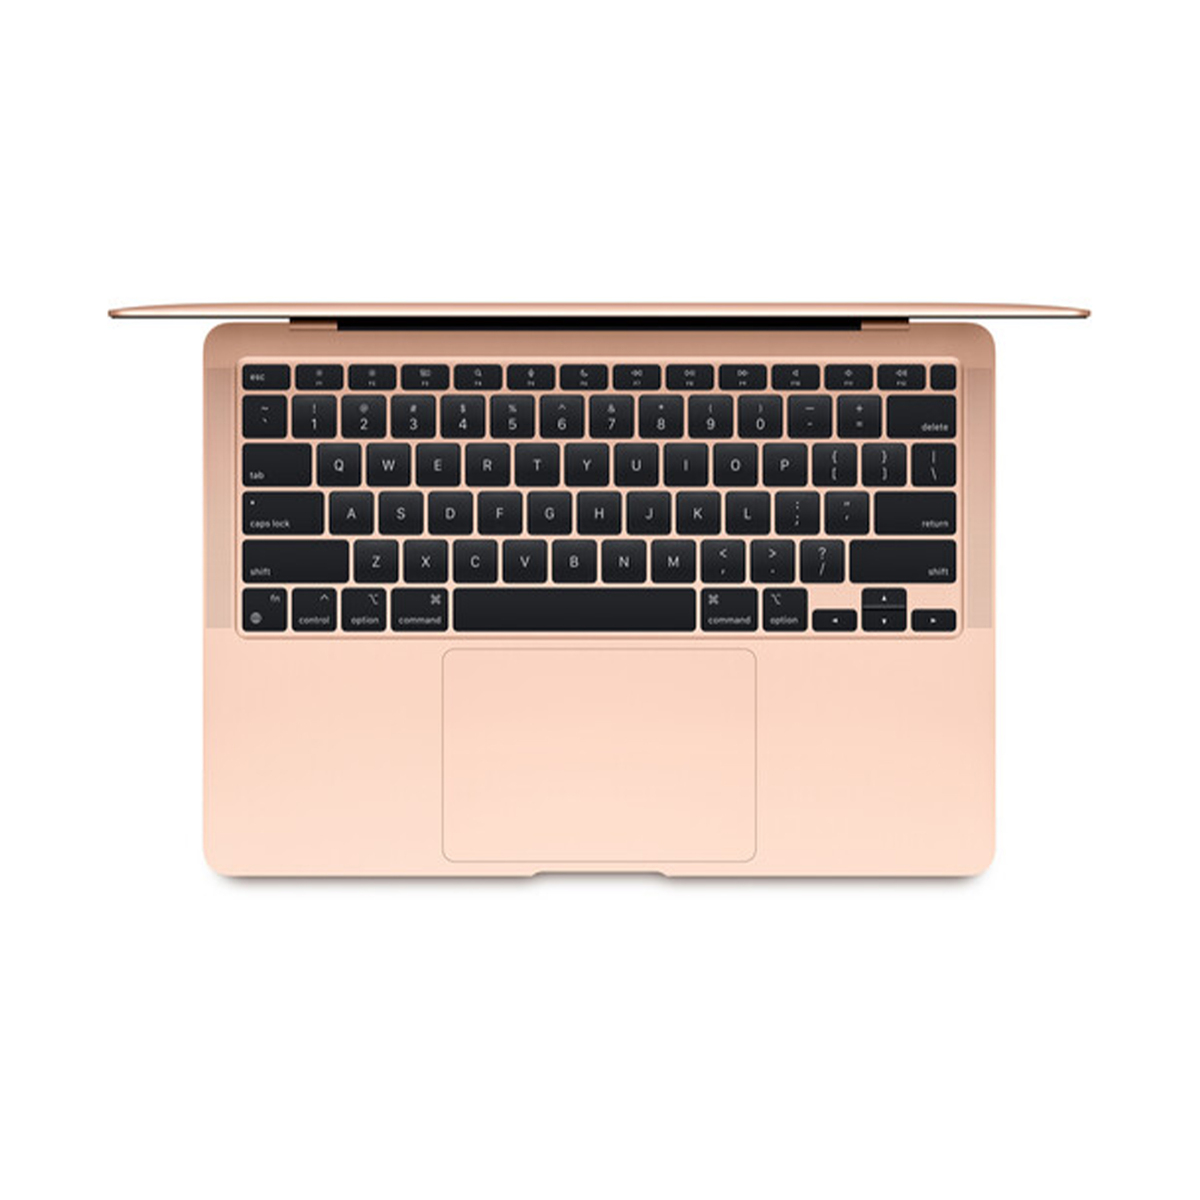 Apple MacBook Air 13" MGND3LL/A, Apple M1 chip with 8-core CPU and 7-core GPU,8GB RAM,256GB SSD,Gold,English Keyboard Only